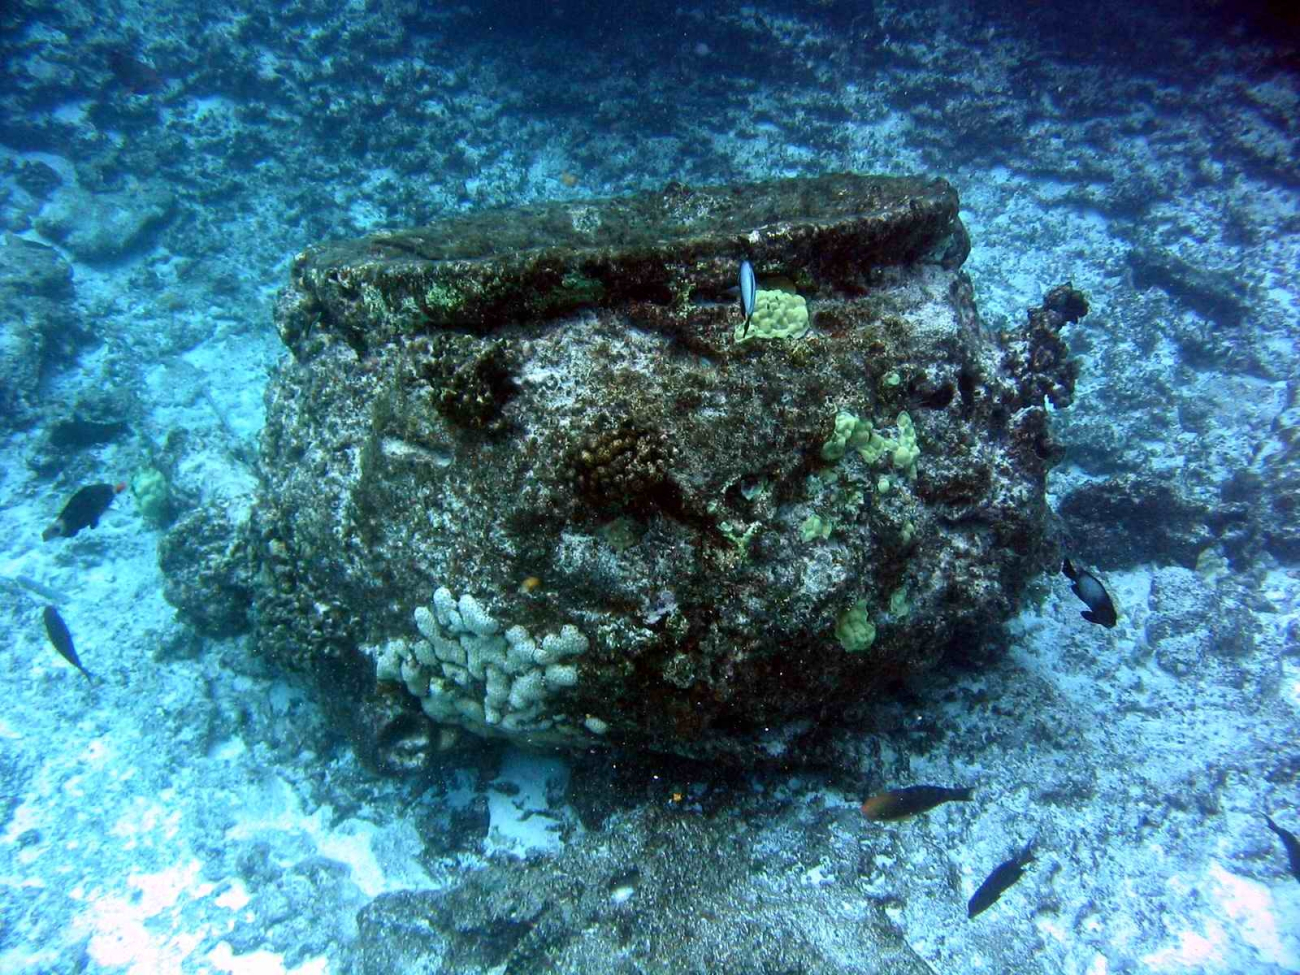 One of the blubber rendering pots from the wreck of an early NineteenthCentury whaling vessel on Pearl and Hermes Reef